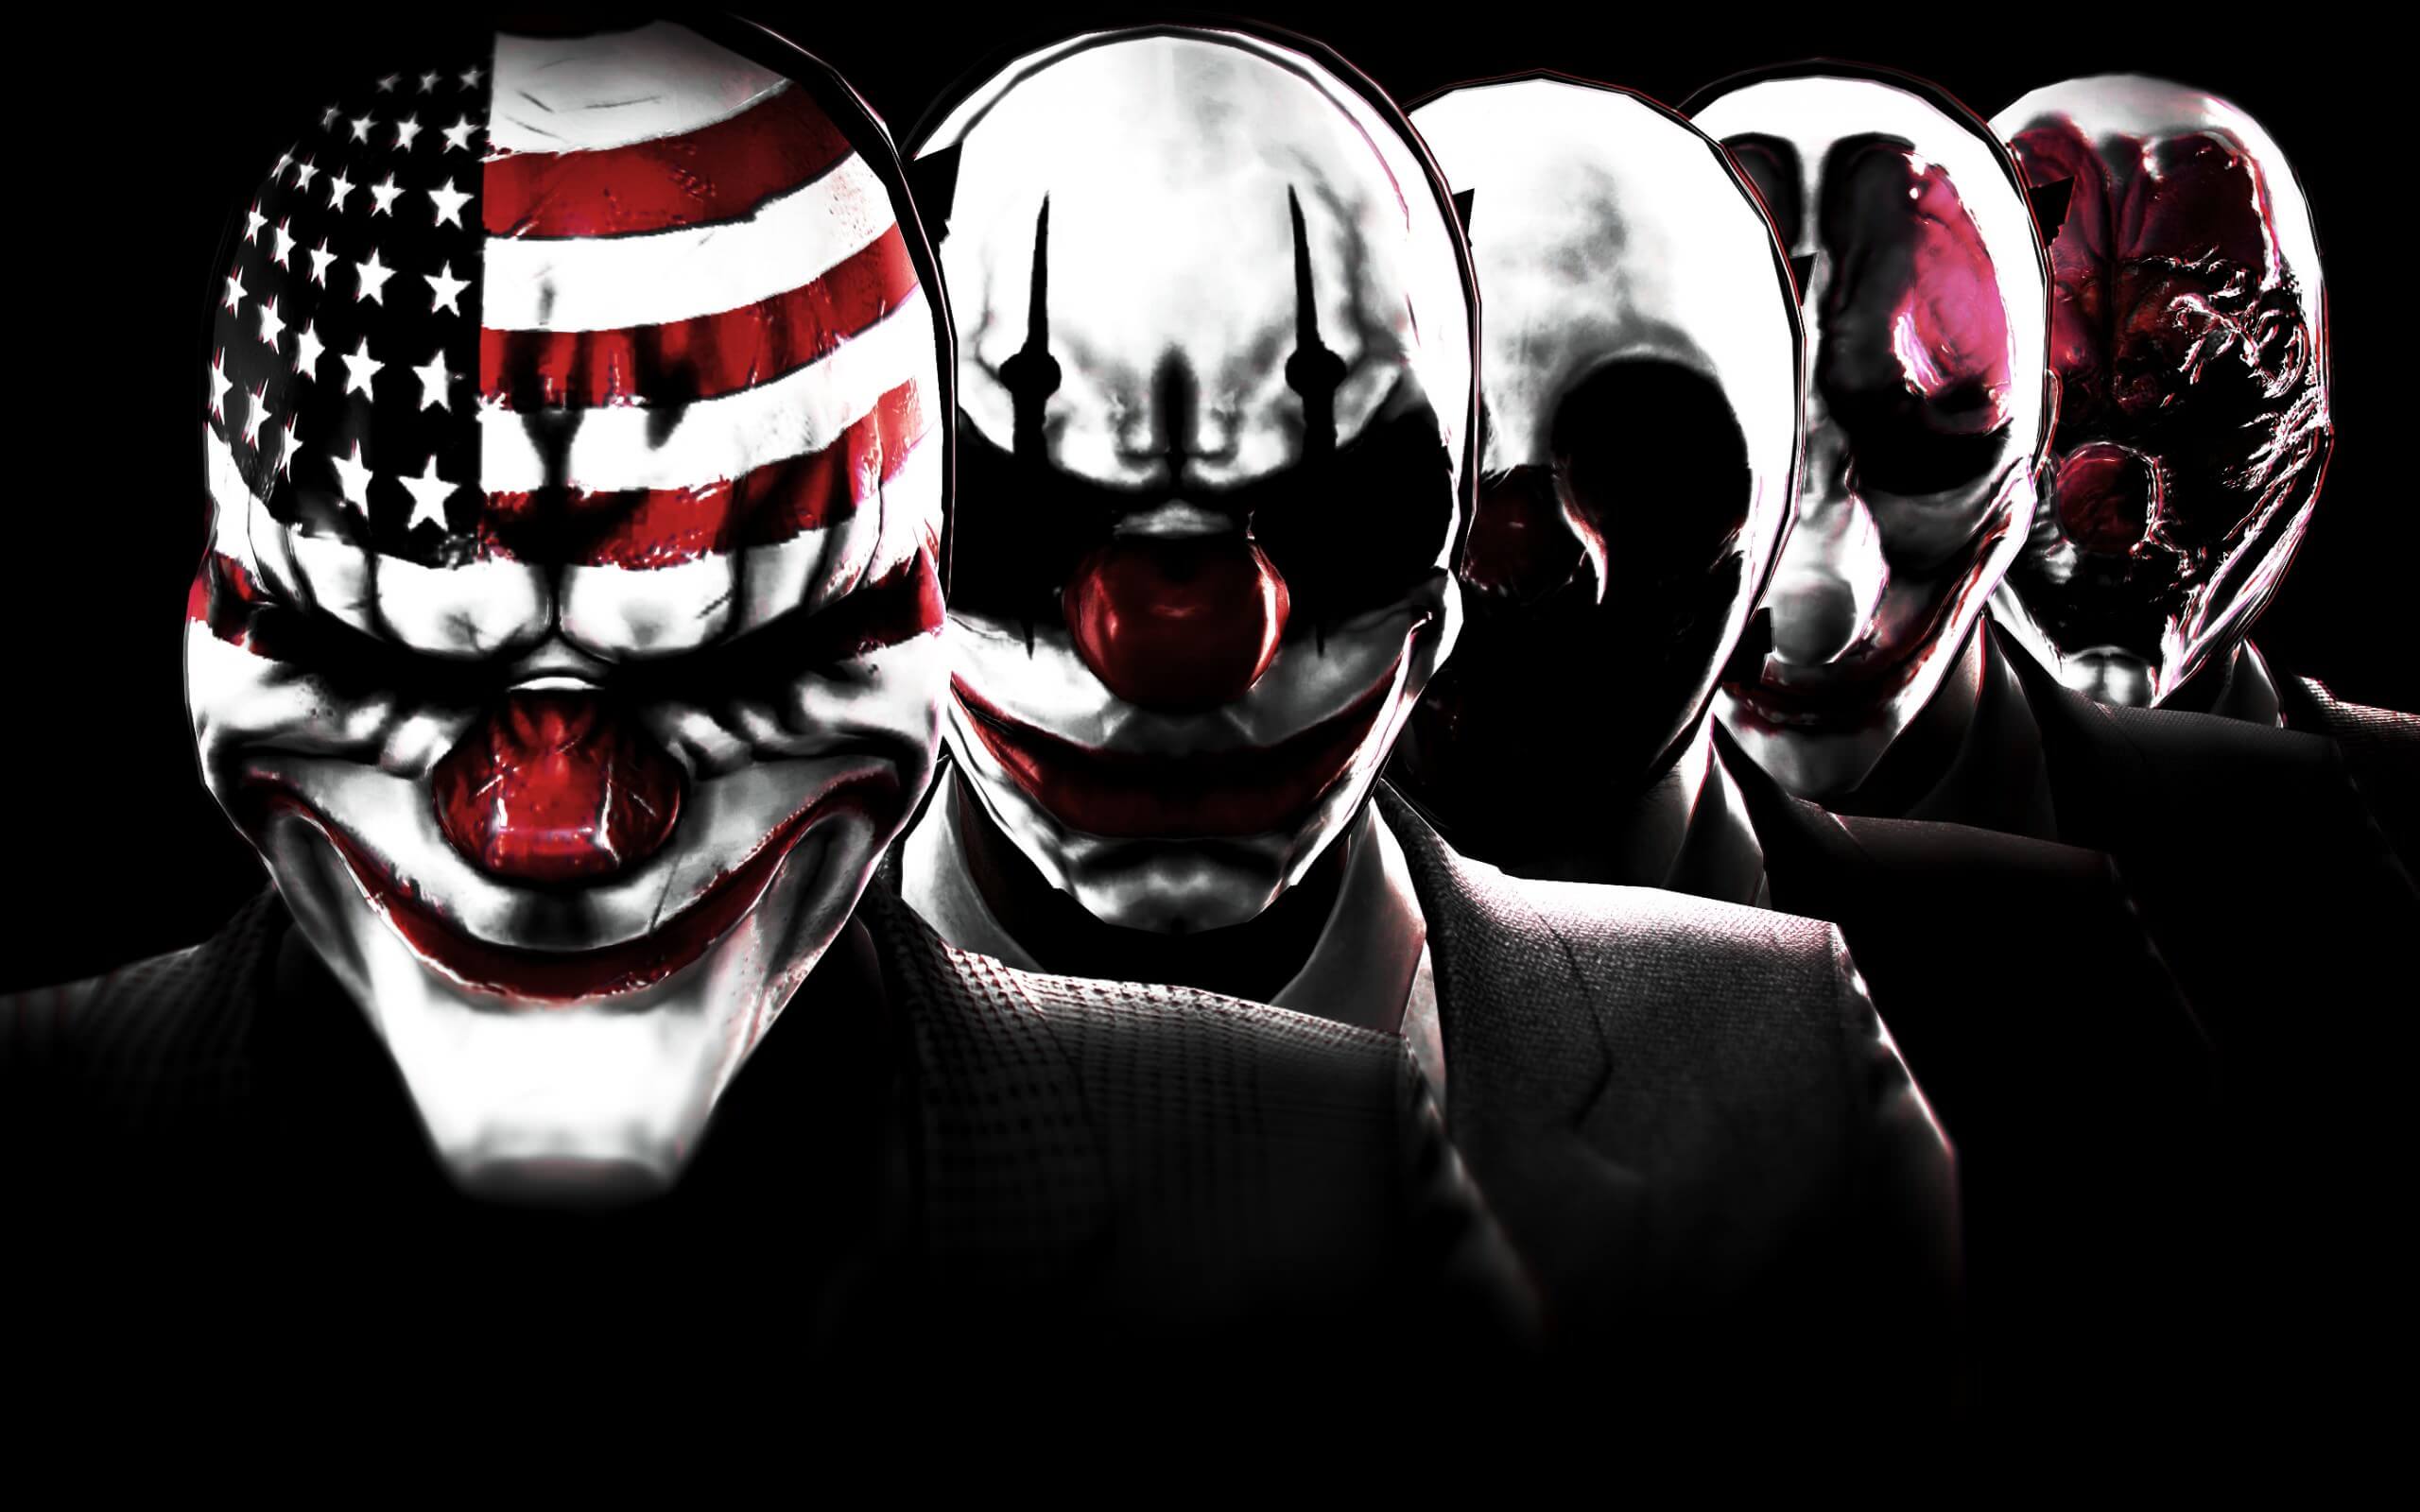 download the new for ios PAYDAY 2